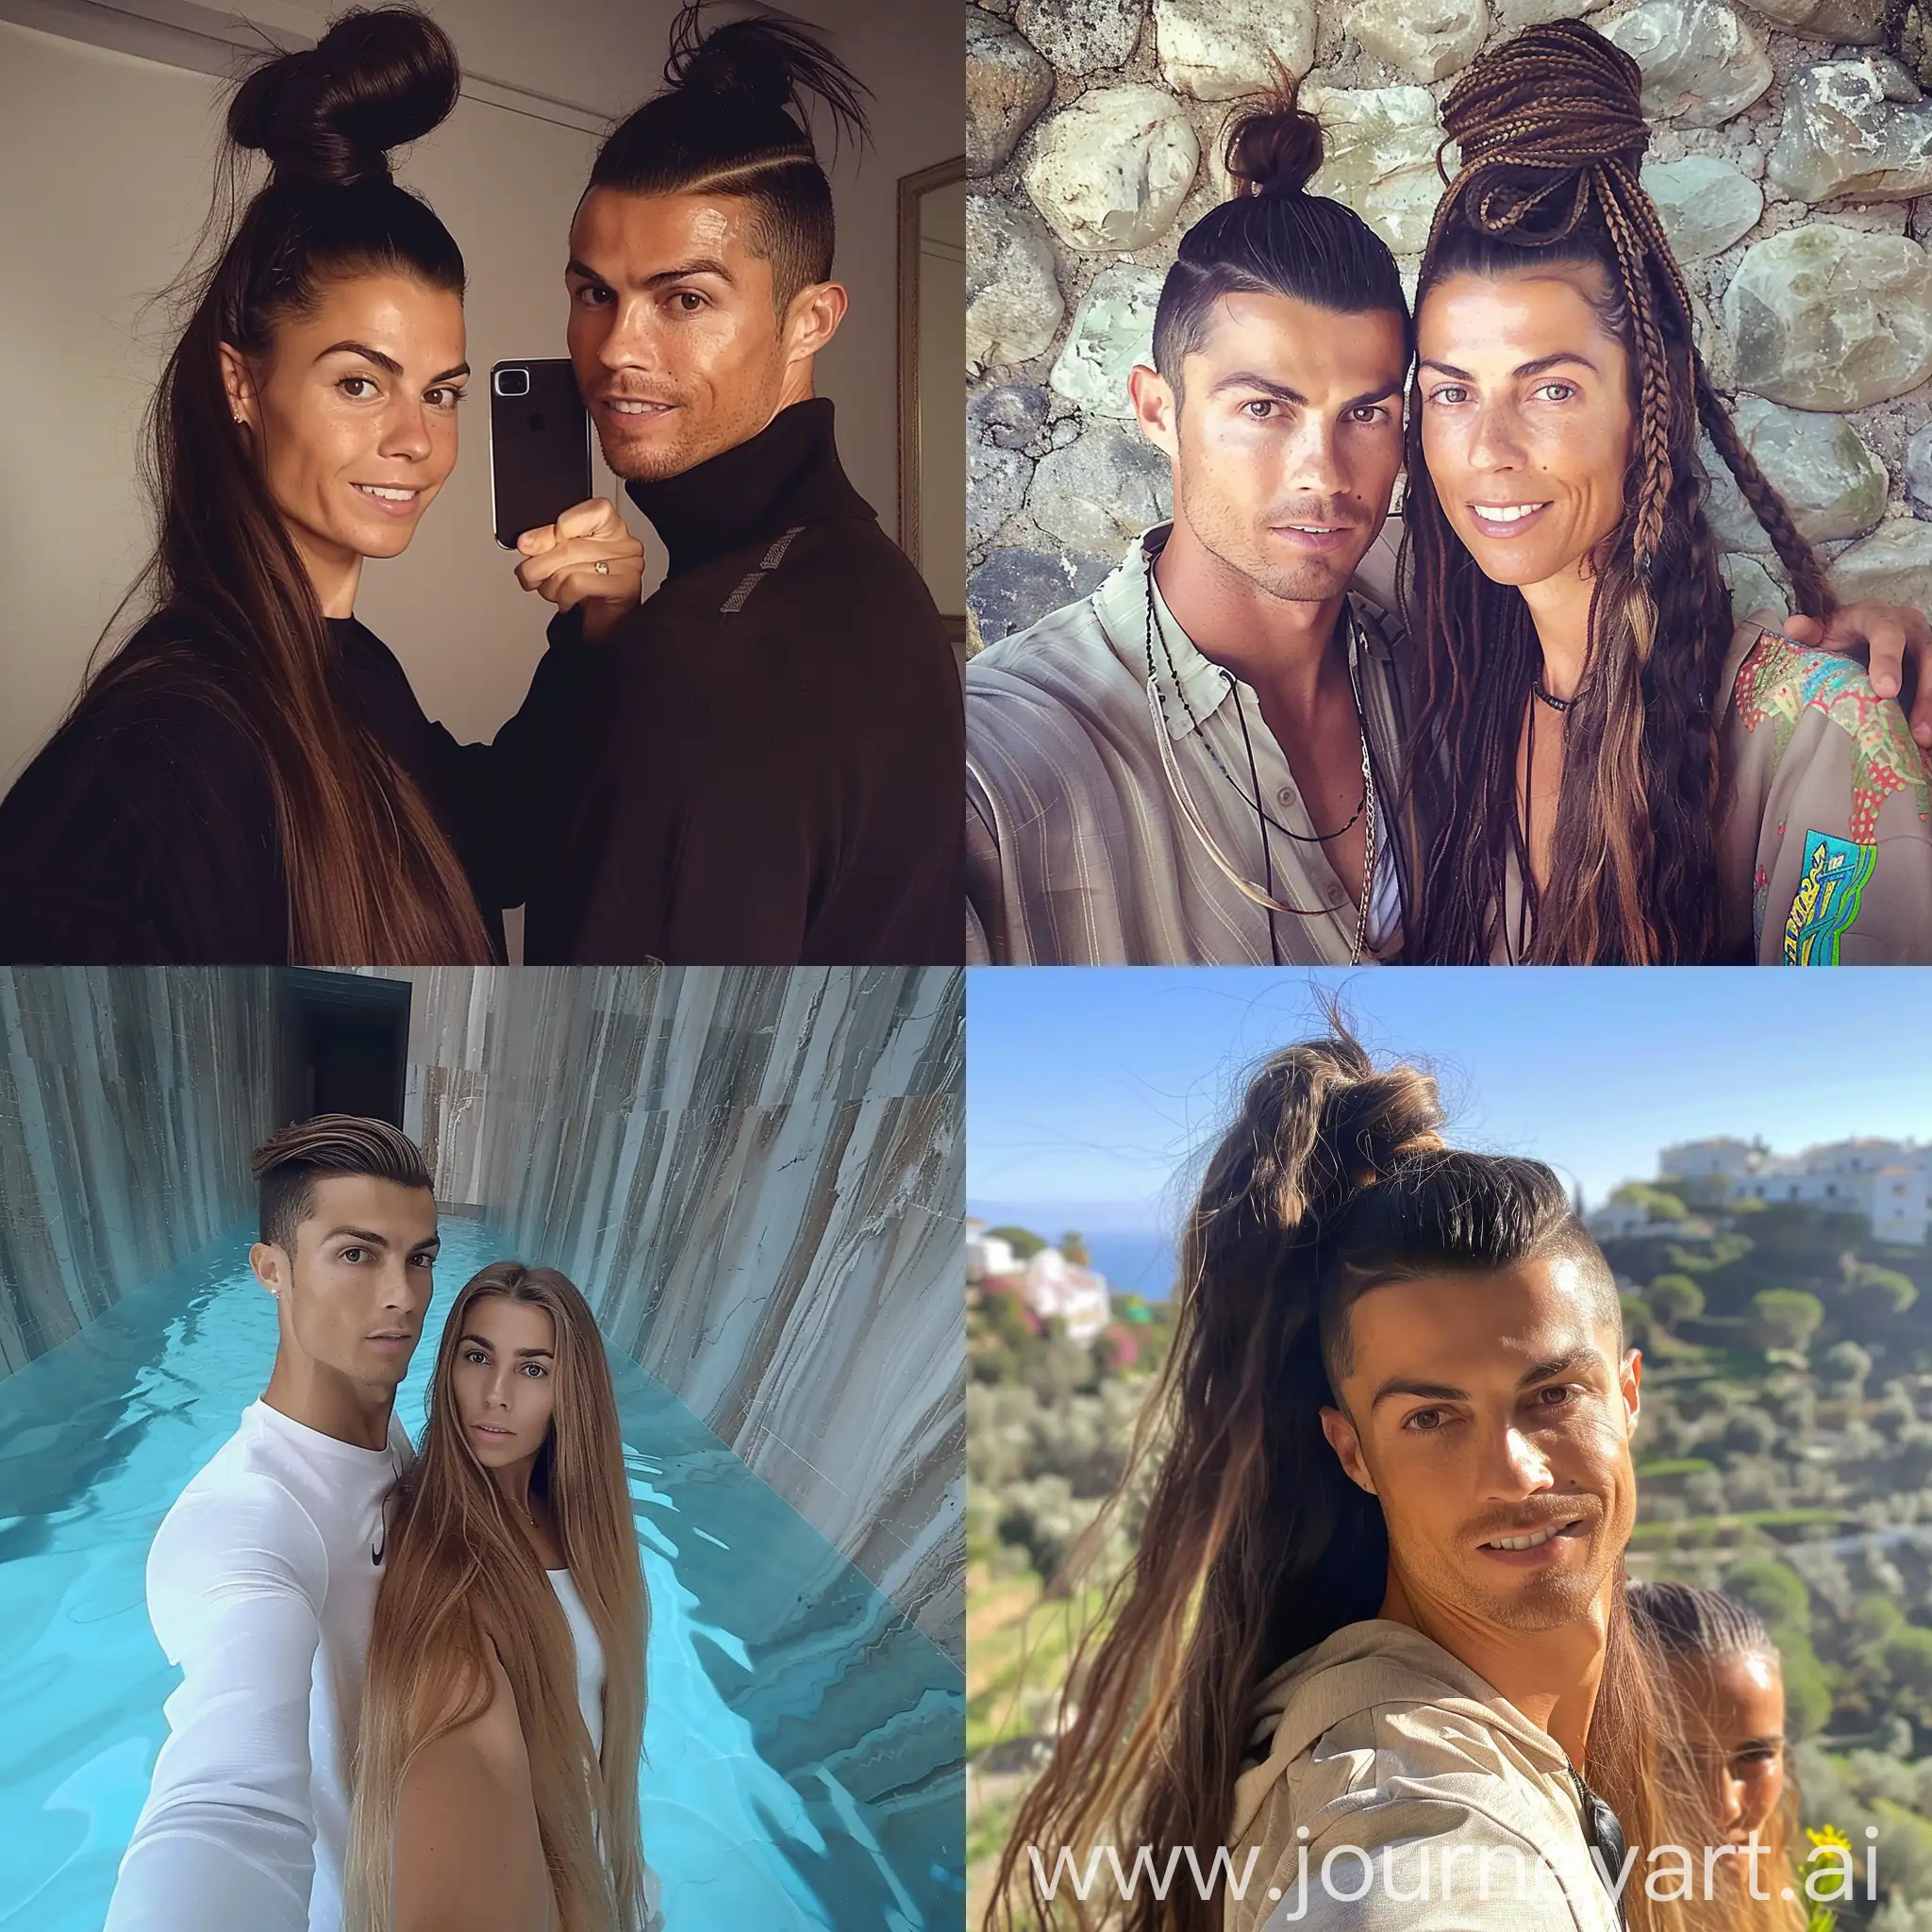 Cristiano-Ronaldo-with-Super-Long-Ponytailed-Model-in-Selfie